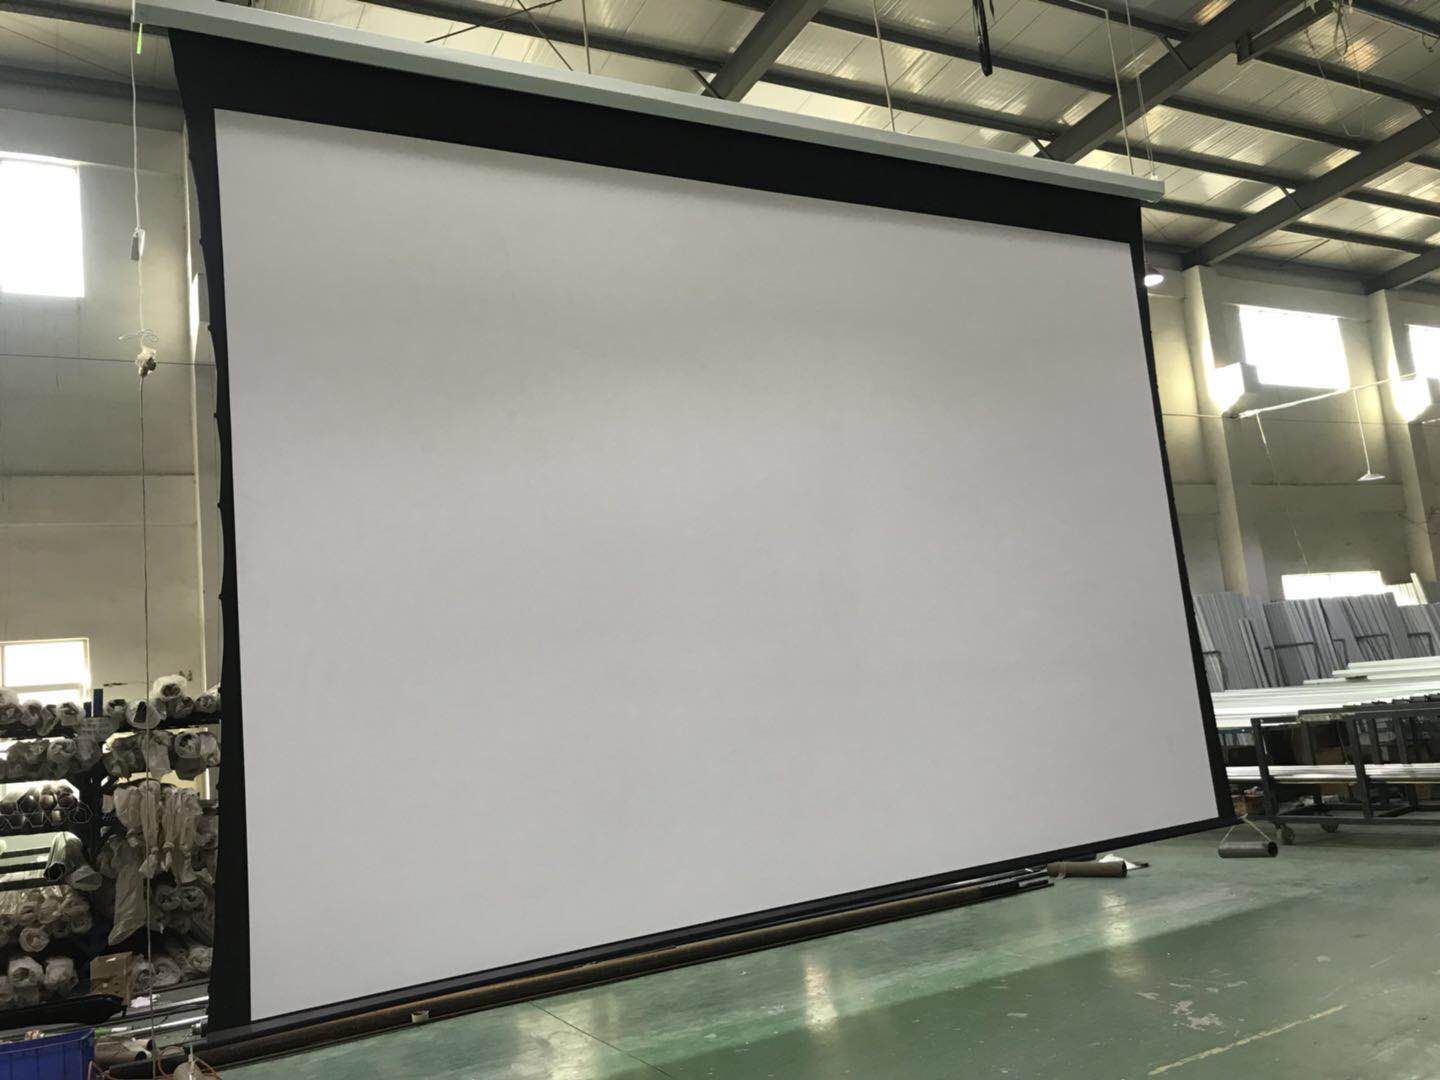 Large 400 Inch Motorized Electric Projector Screen With Remote